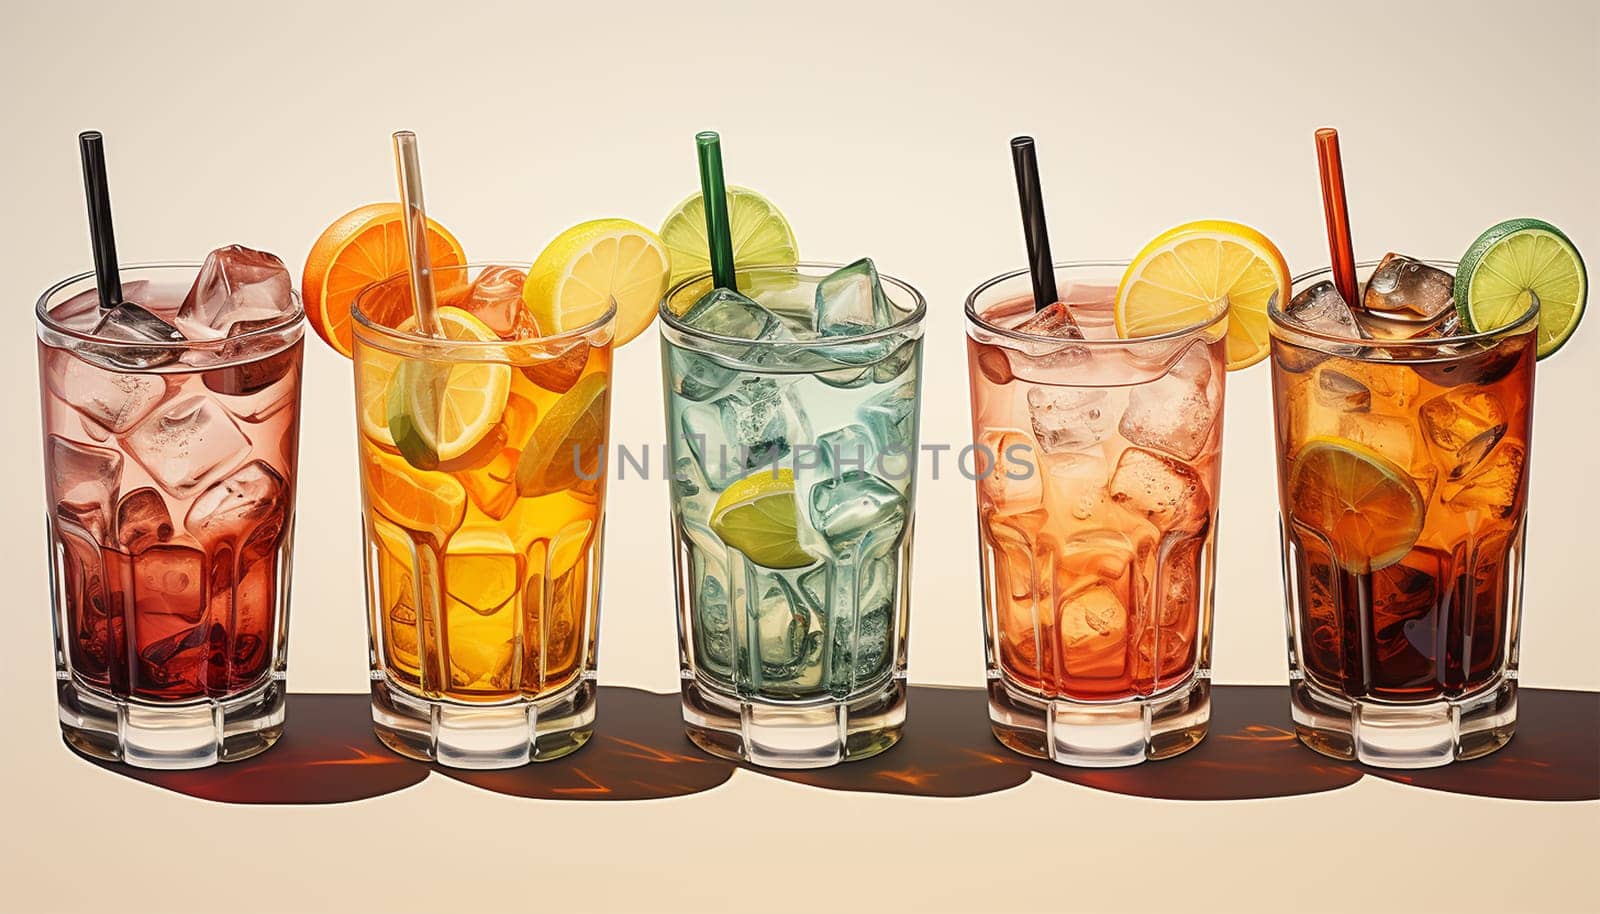 Row of various drinks on light background. Collection of various alcoholic cocktails drink glasses, icons set, different kind of mocktails colorful. Cocktail party concept celebration